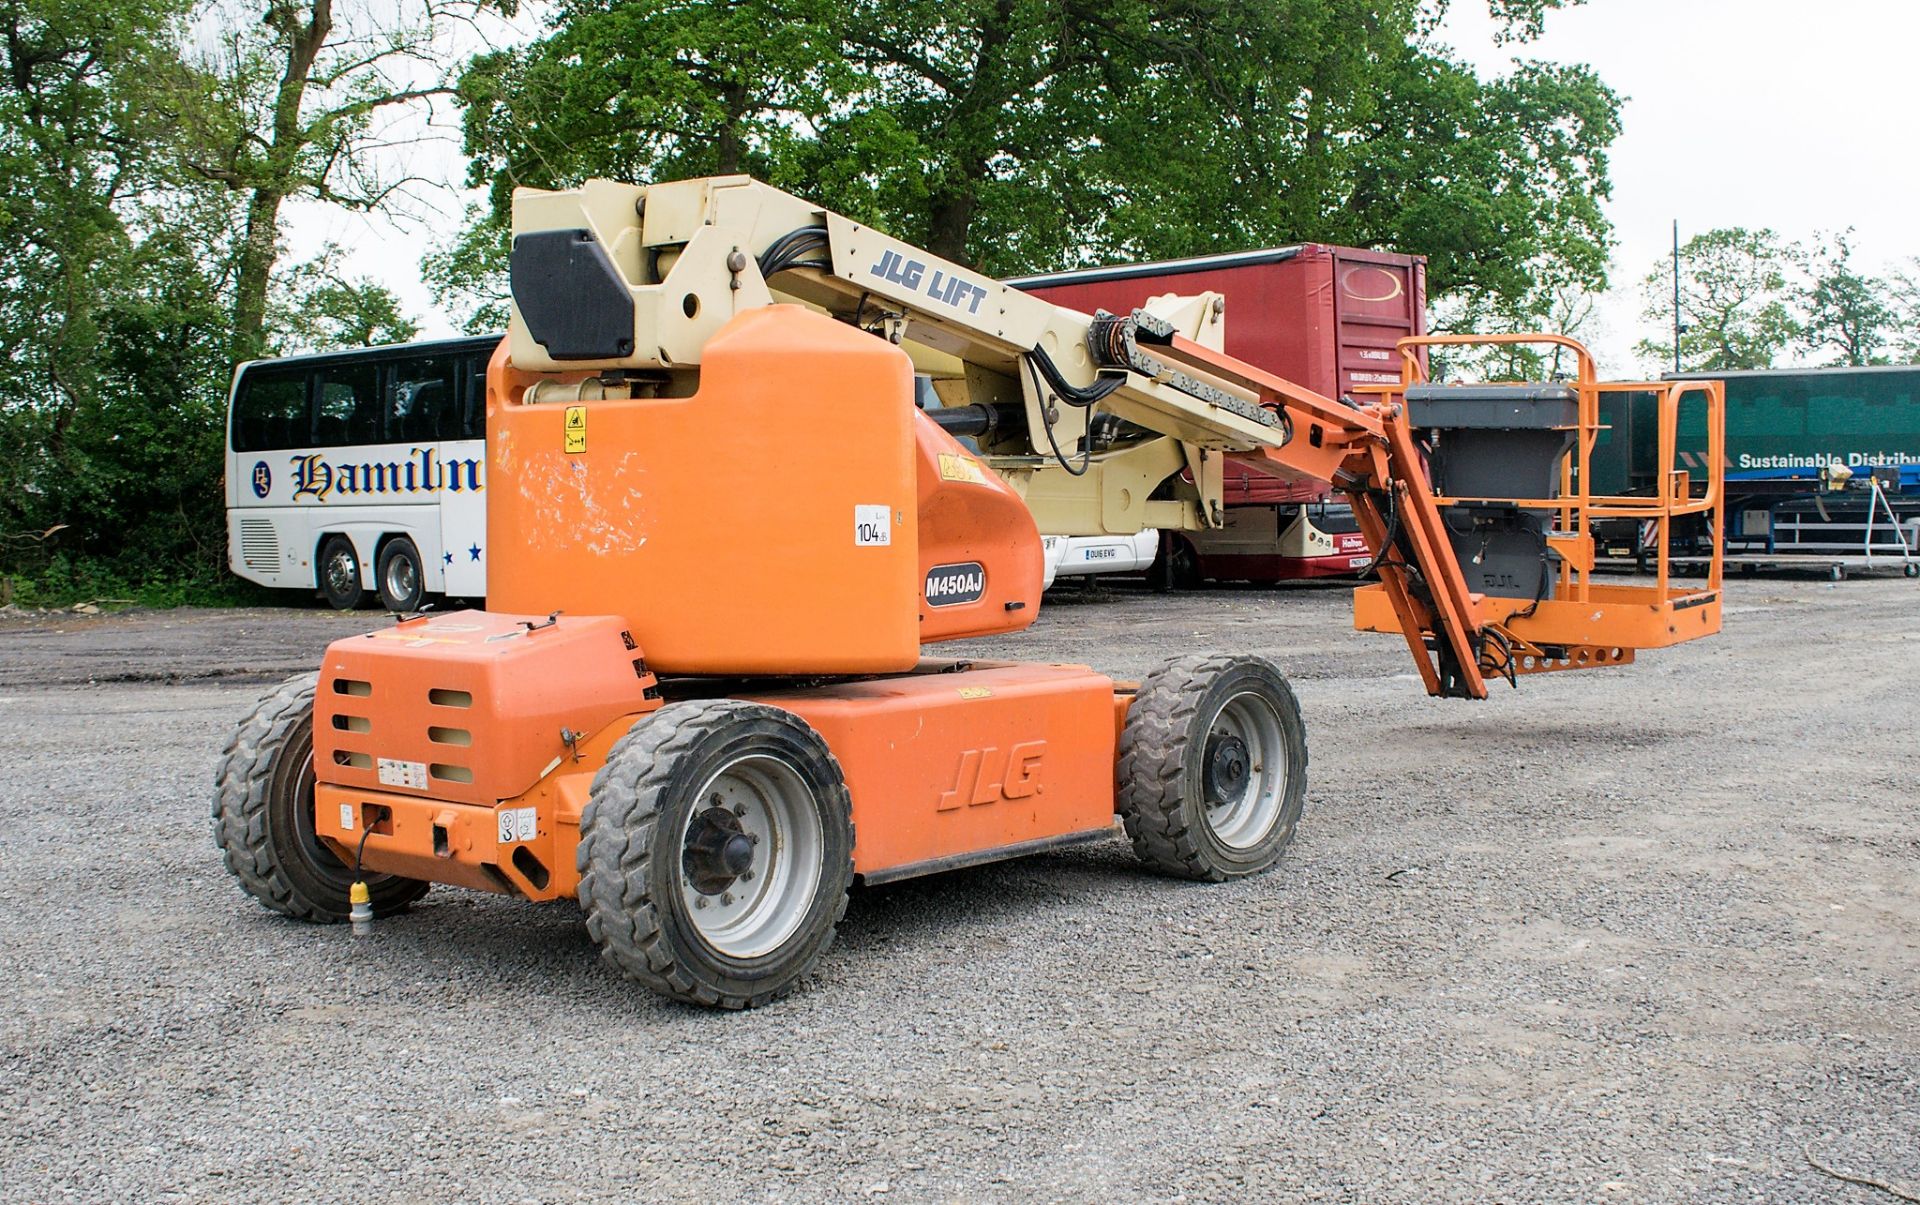 JLG M450AJ battery electric/diesel 4WD articulated boom lift access platforms  Year: 2007 S/N: 22639 - Image 3 of 17